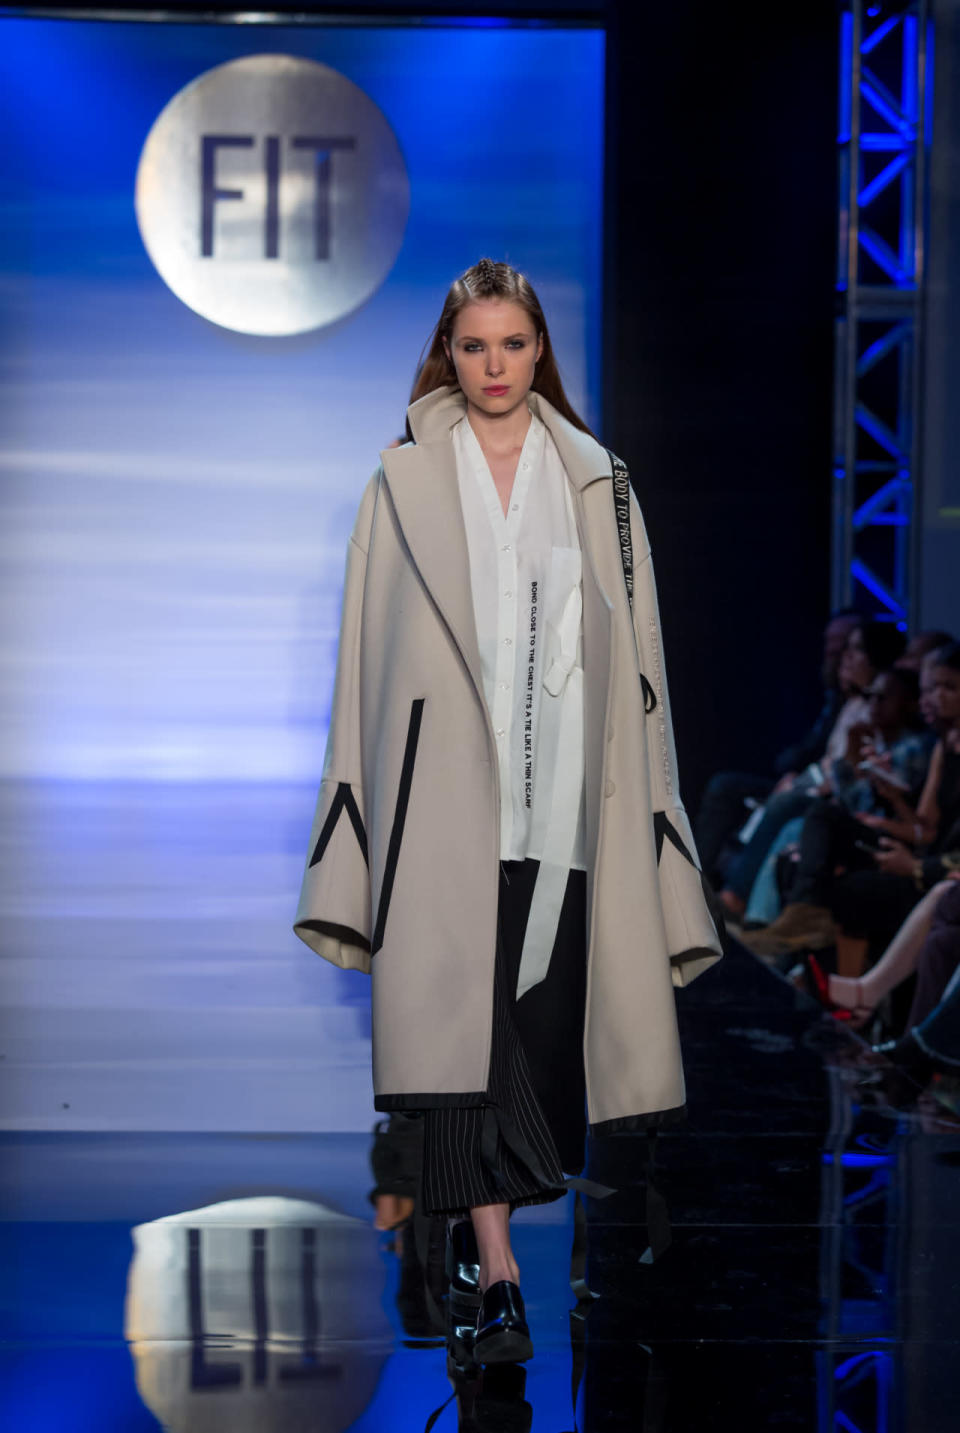 FIT graduate Emily Myoung Hye Jung’s look combined a generously cut coat with cool cropped trousers.